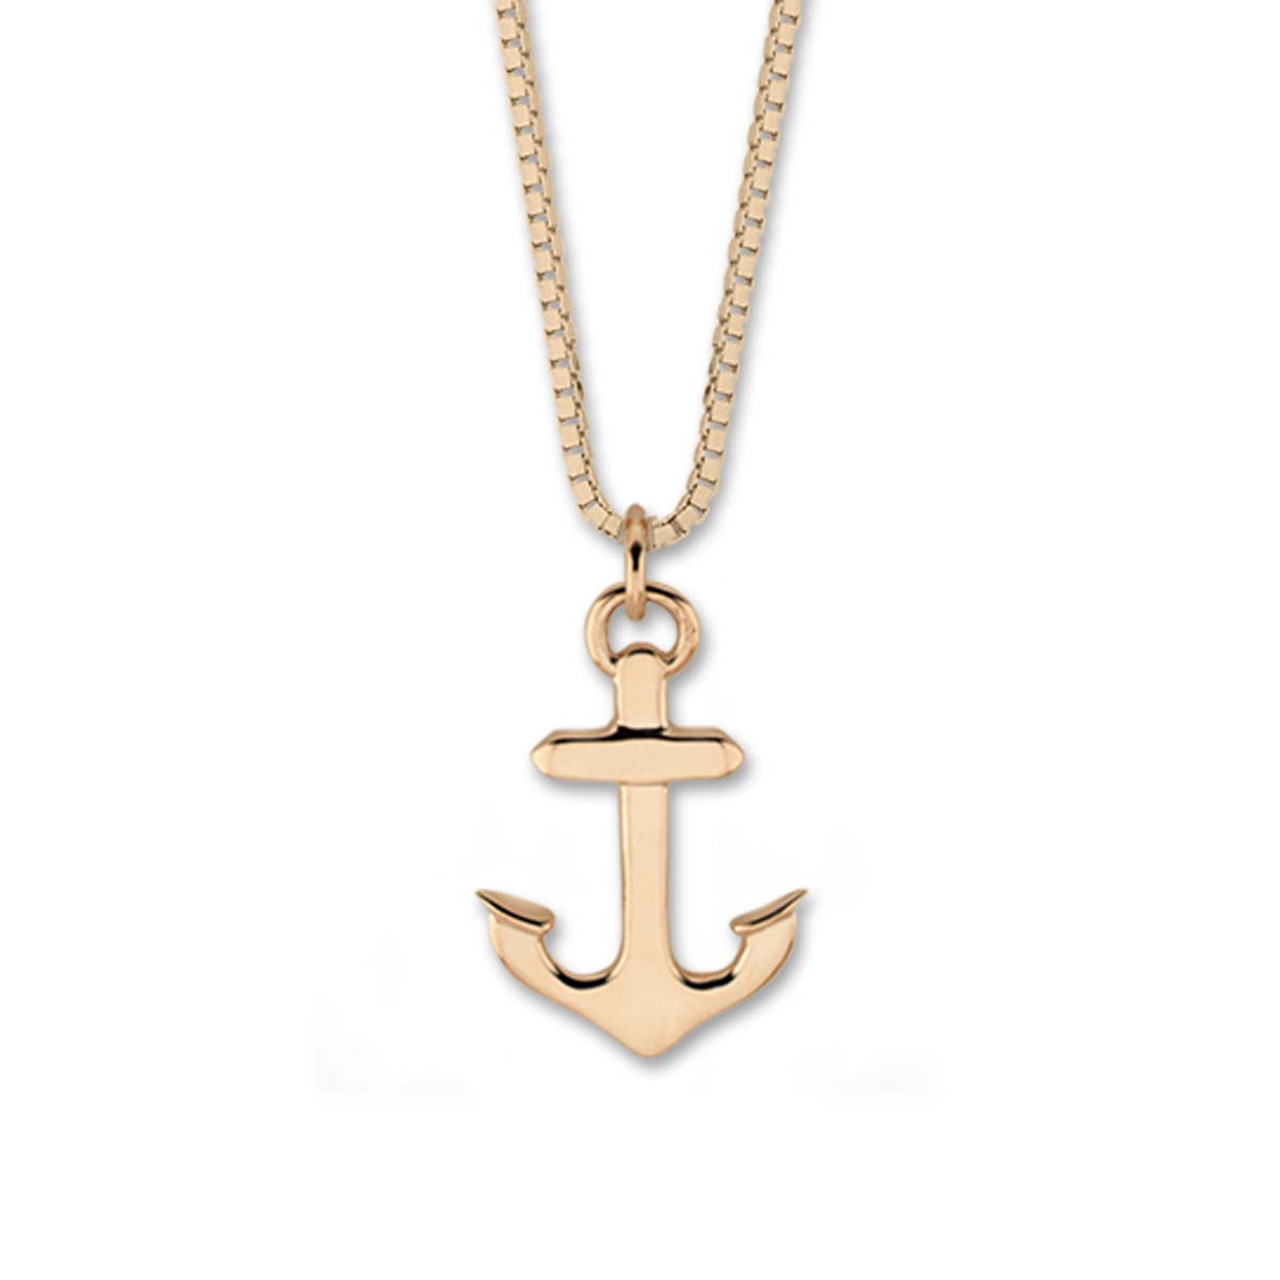 Anchor necklace for men, bronze anchor pendant and a black string, handmade  gift for him